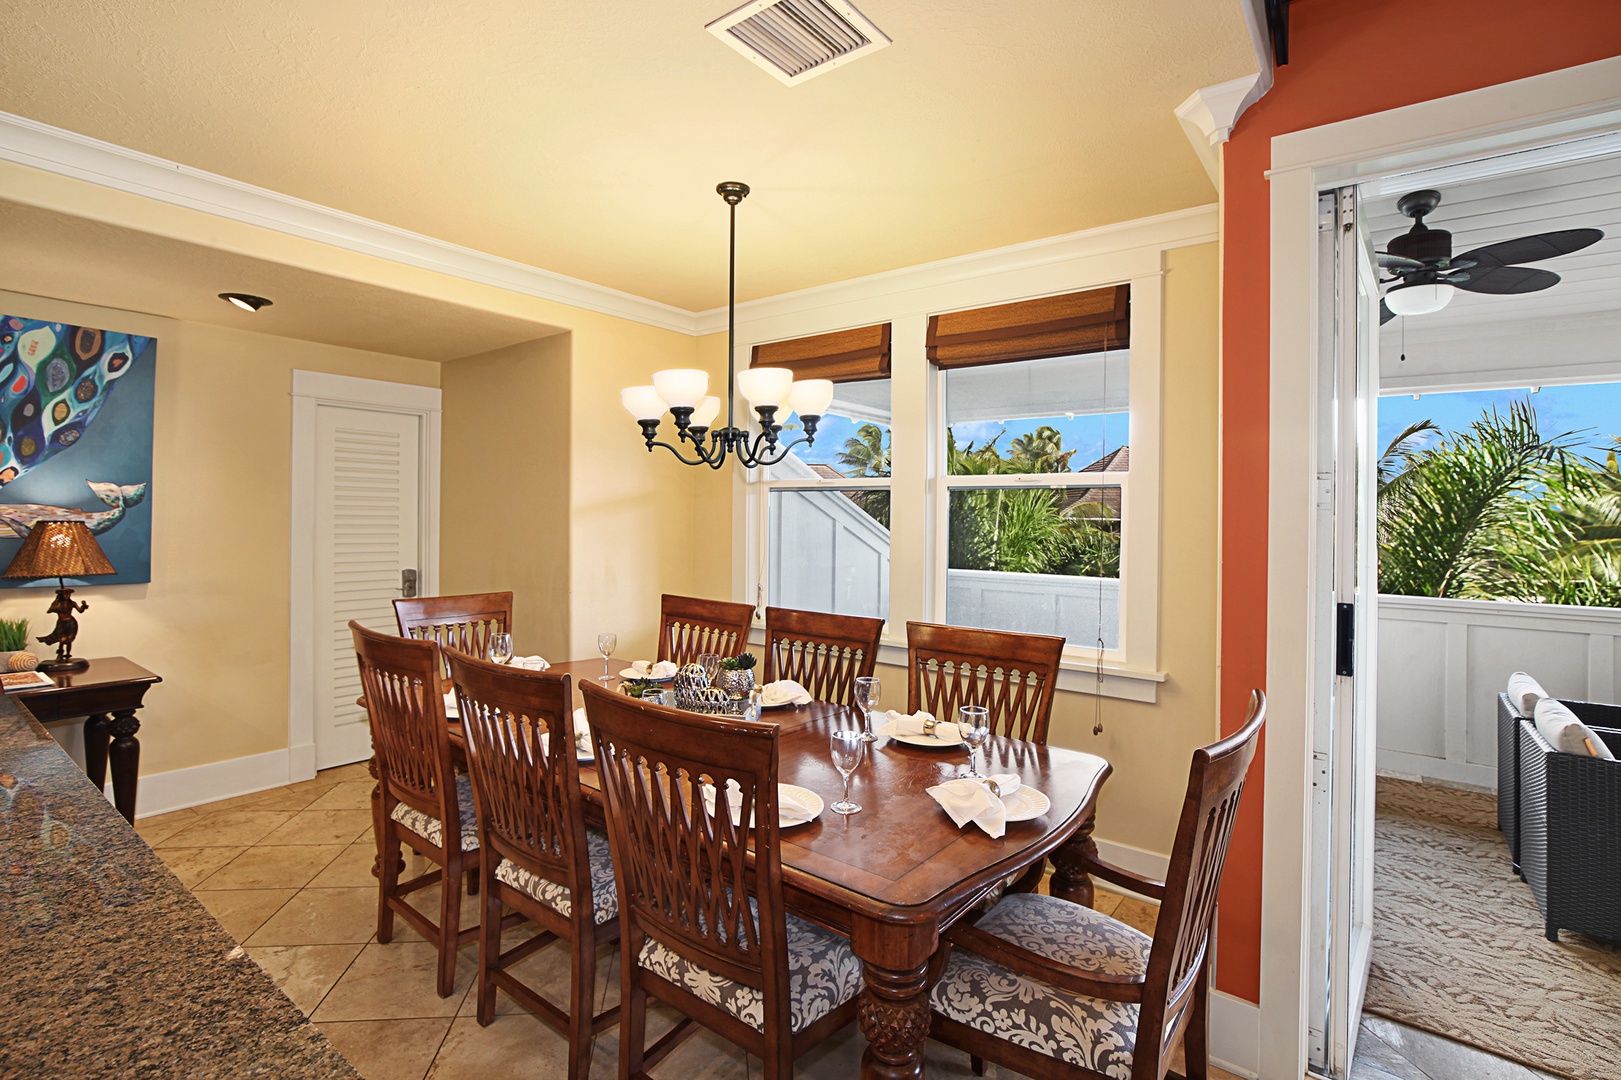 Koloa Vacation Rentals, Villas at Poipu Kai B300 - Rustic charm of the dining area with table for eight.